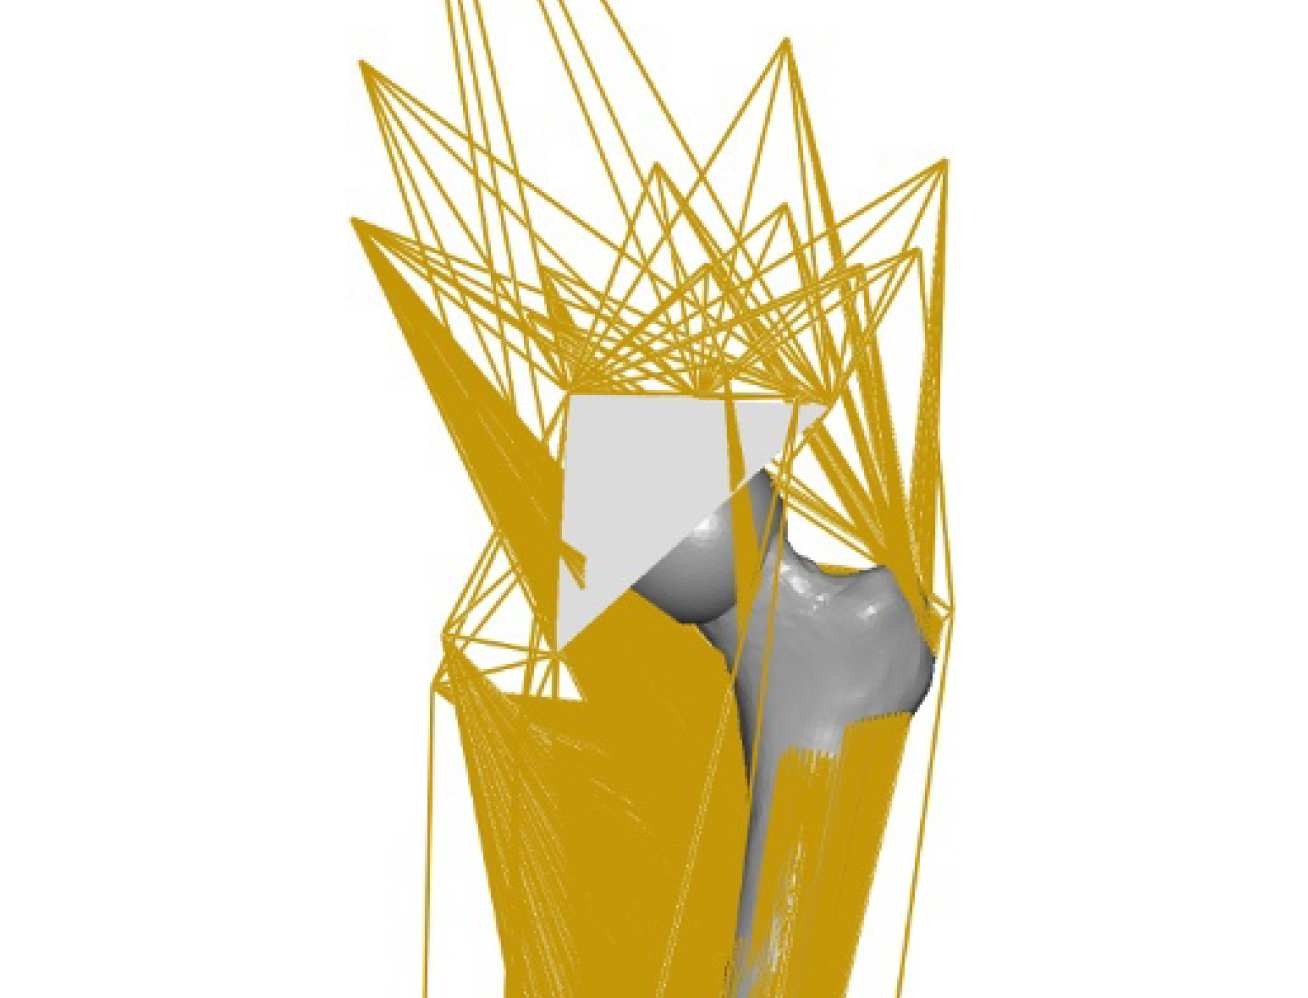   Free boundary condition model of the femur